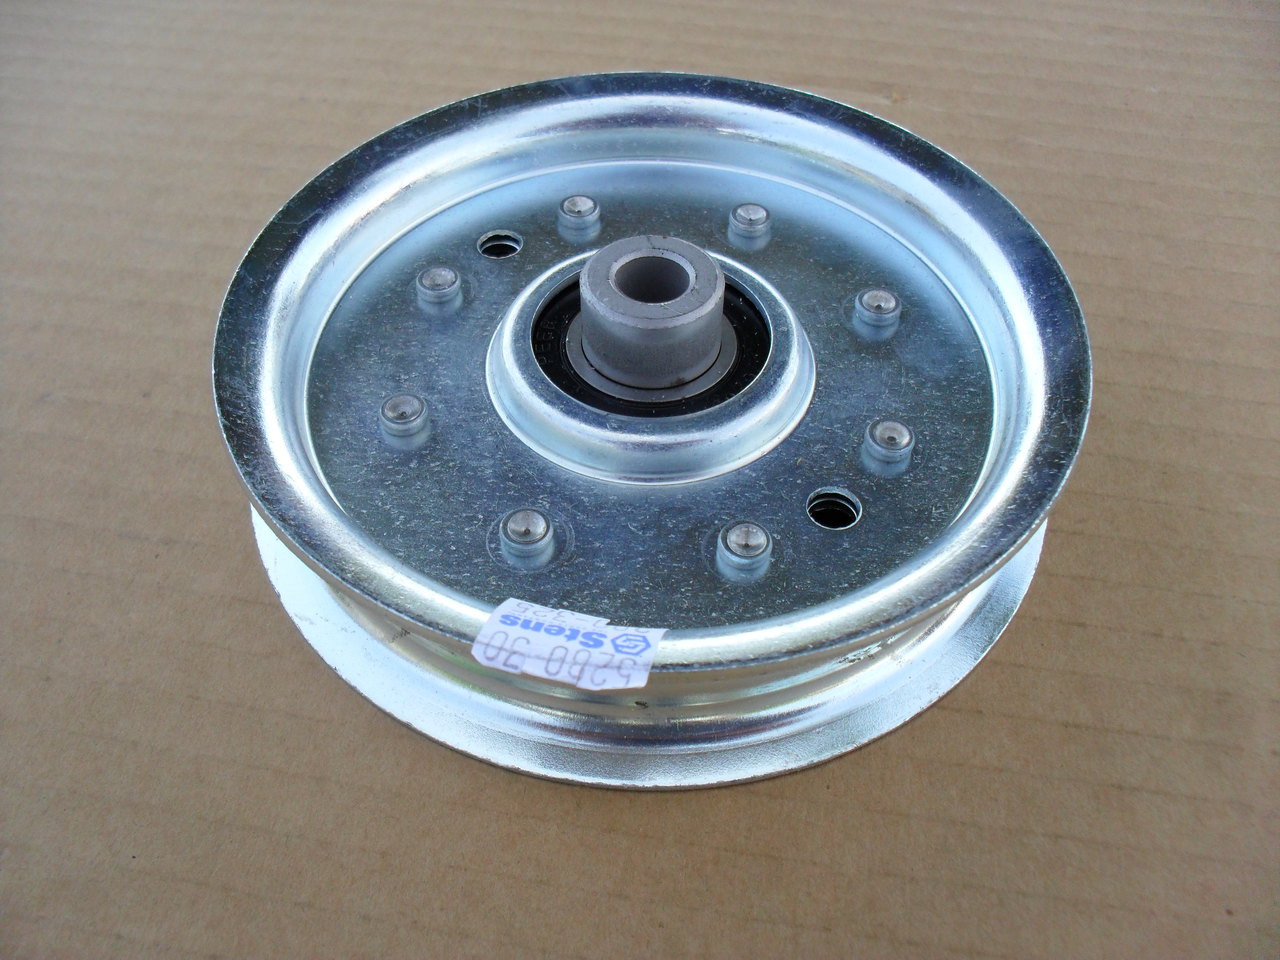 Flat Idler Pulley for Bobcat 2306005, 2308000, 38010-1A, 380101A, OD: 4-5/8", ID: 3/8" Made In USA